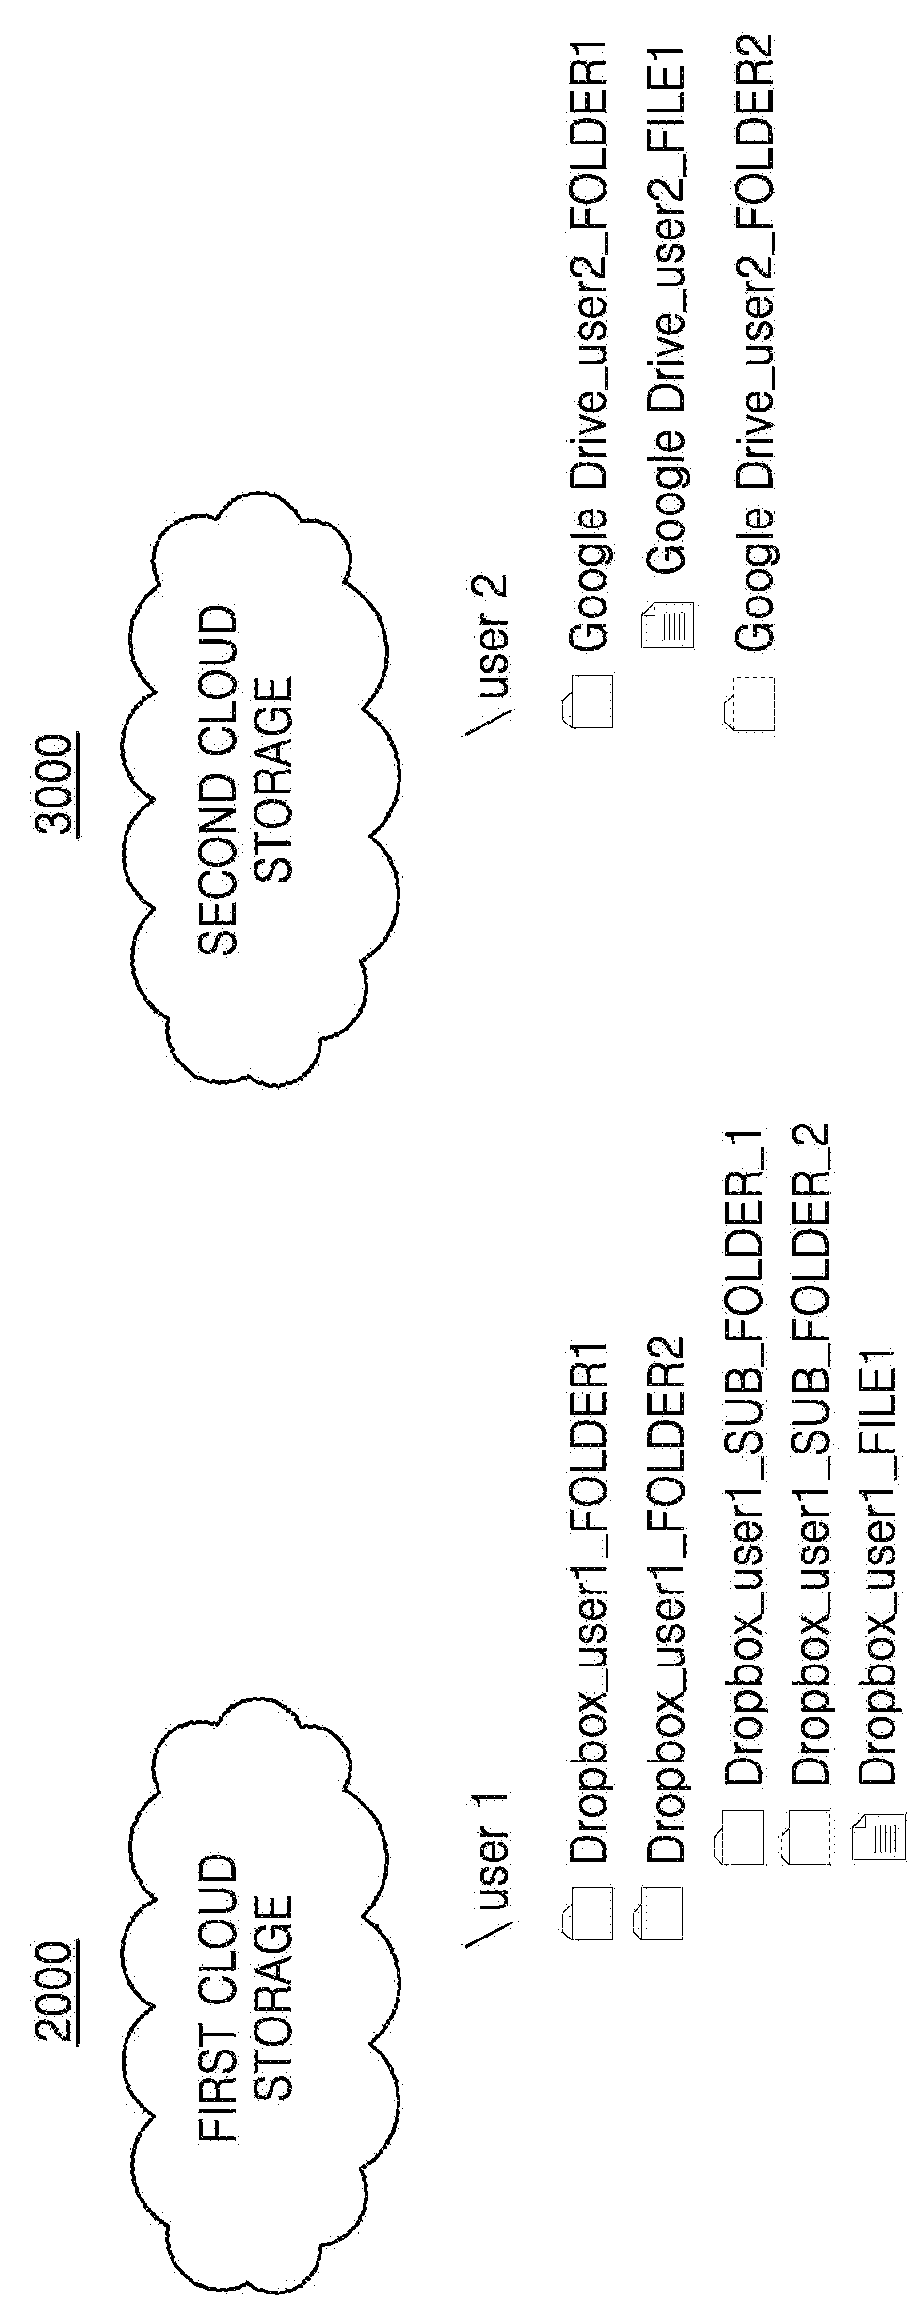 Method and apparatus for sharing data